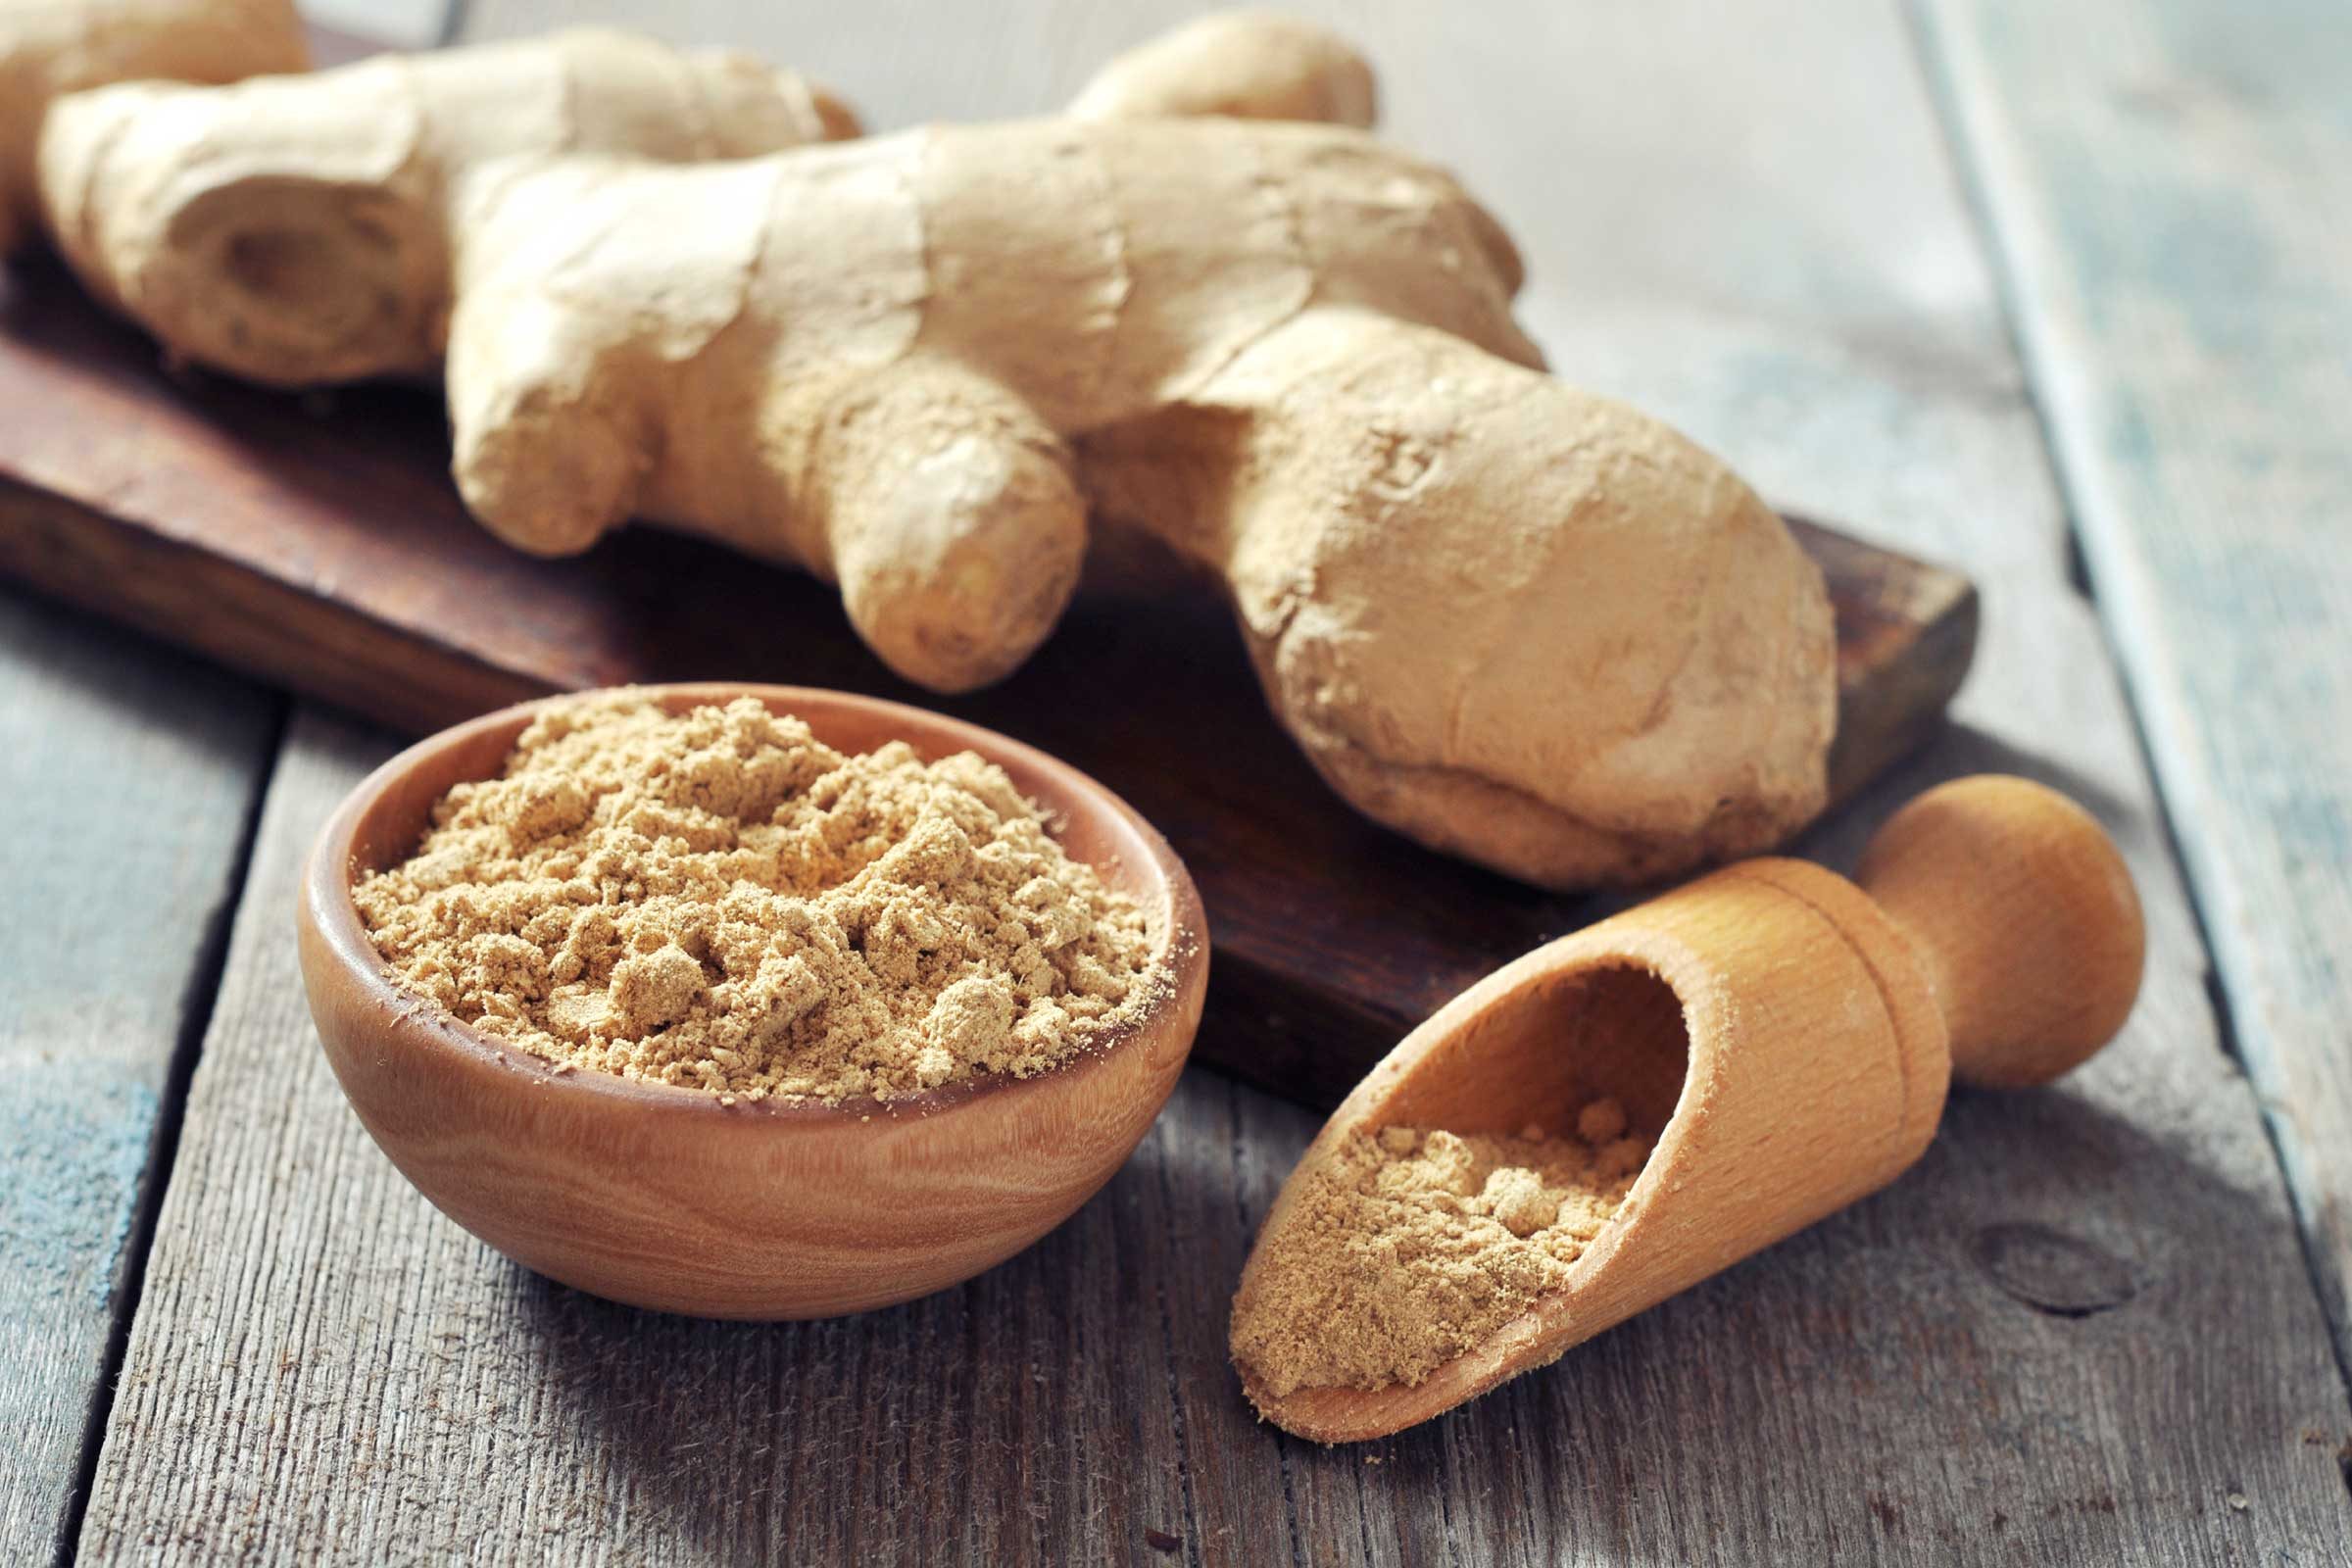 Spice things up with ginger